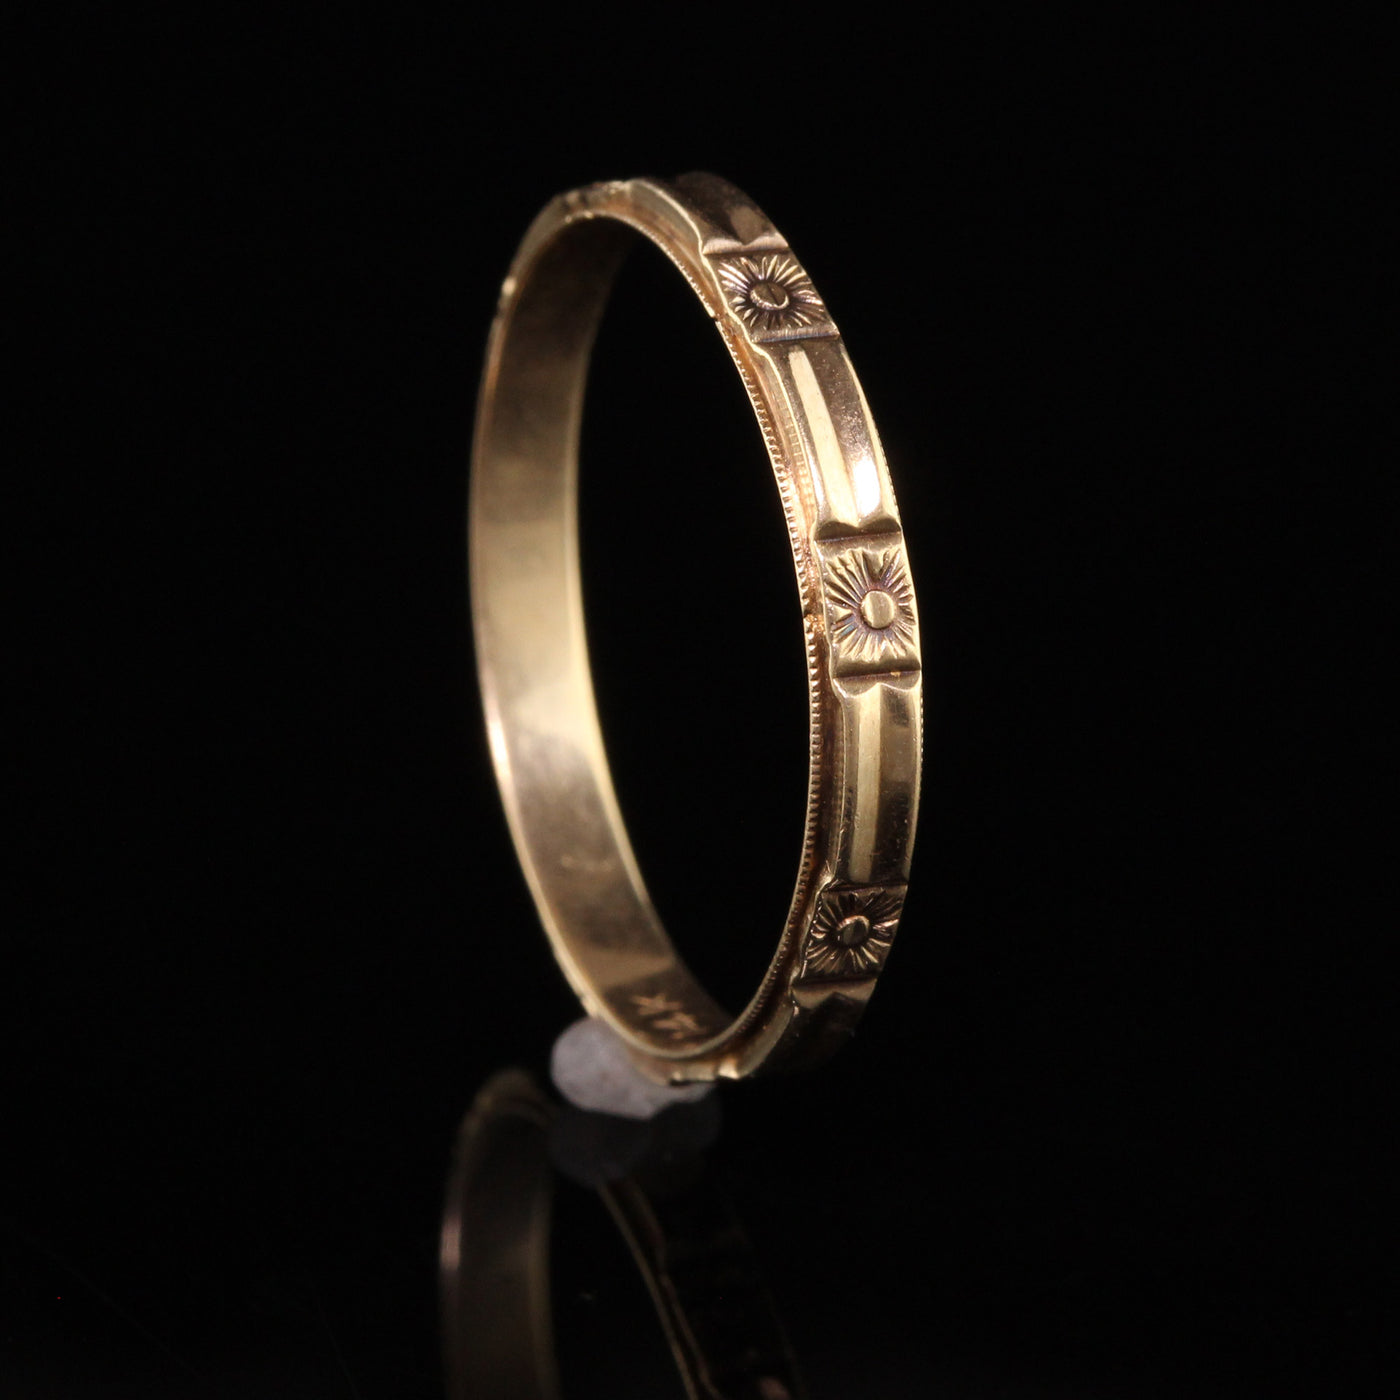 Antique Art Deco 14K Yellow Gold Engraved Wedding Band - Size 11 3/4